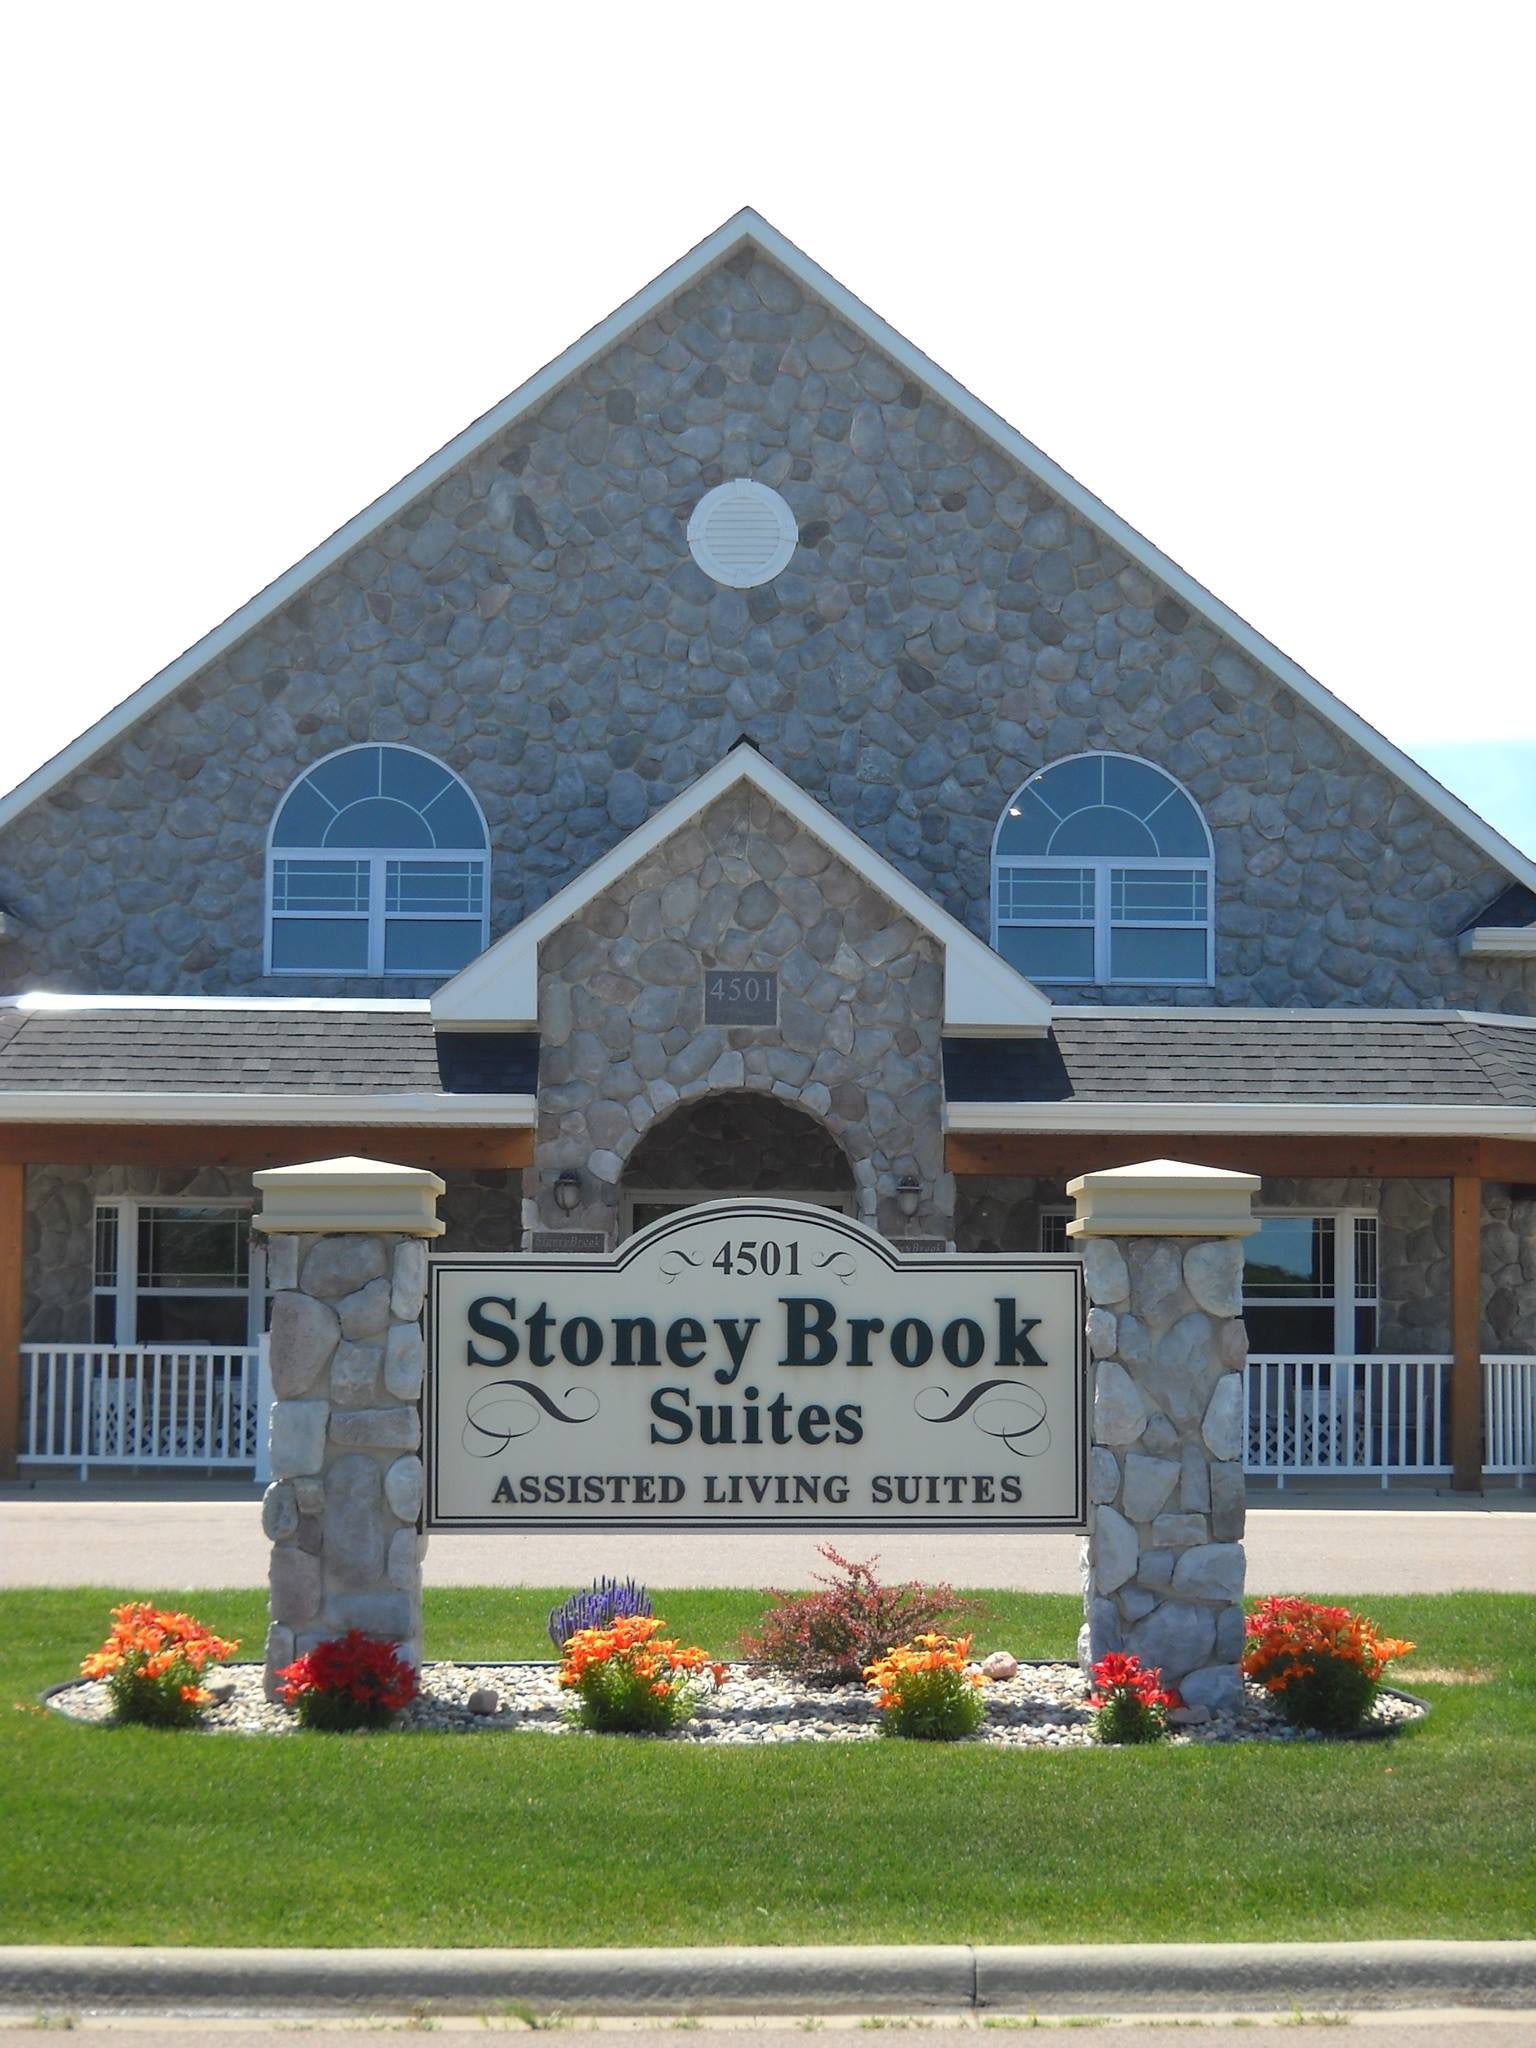 StoneyBrook Suites Sioux Falls 